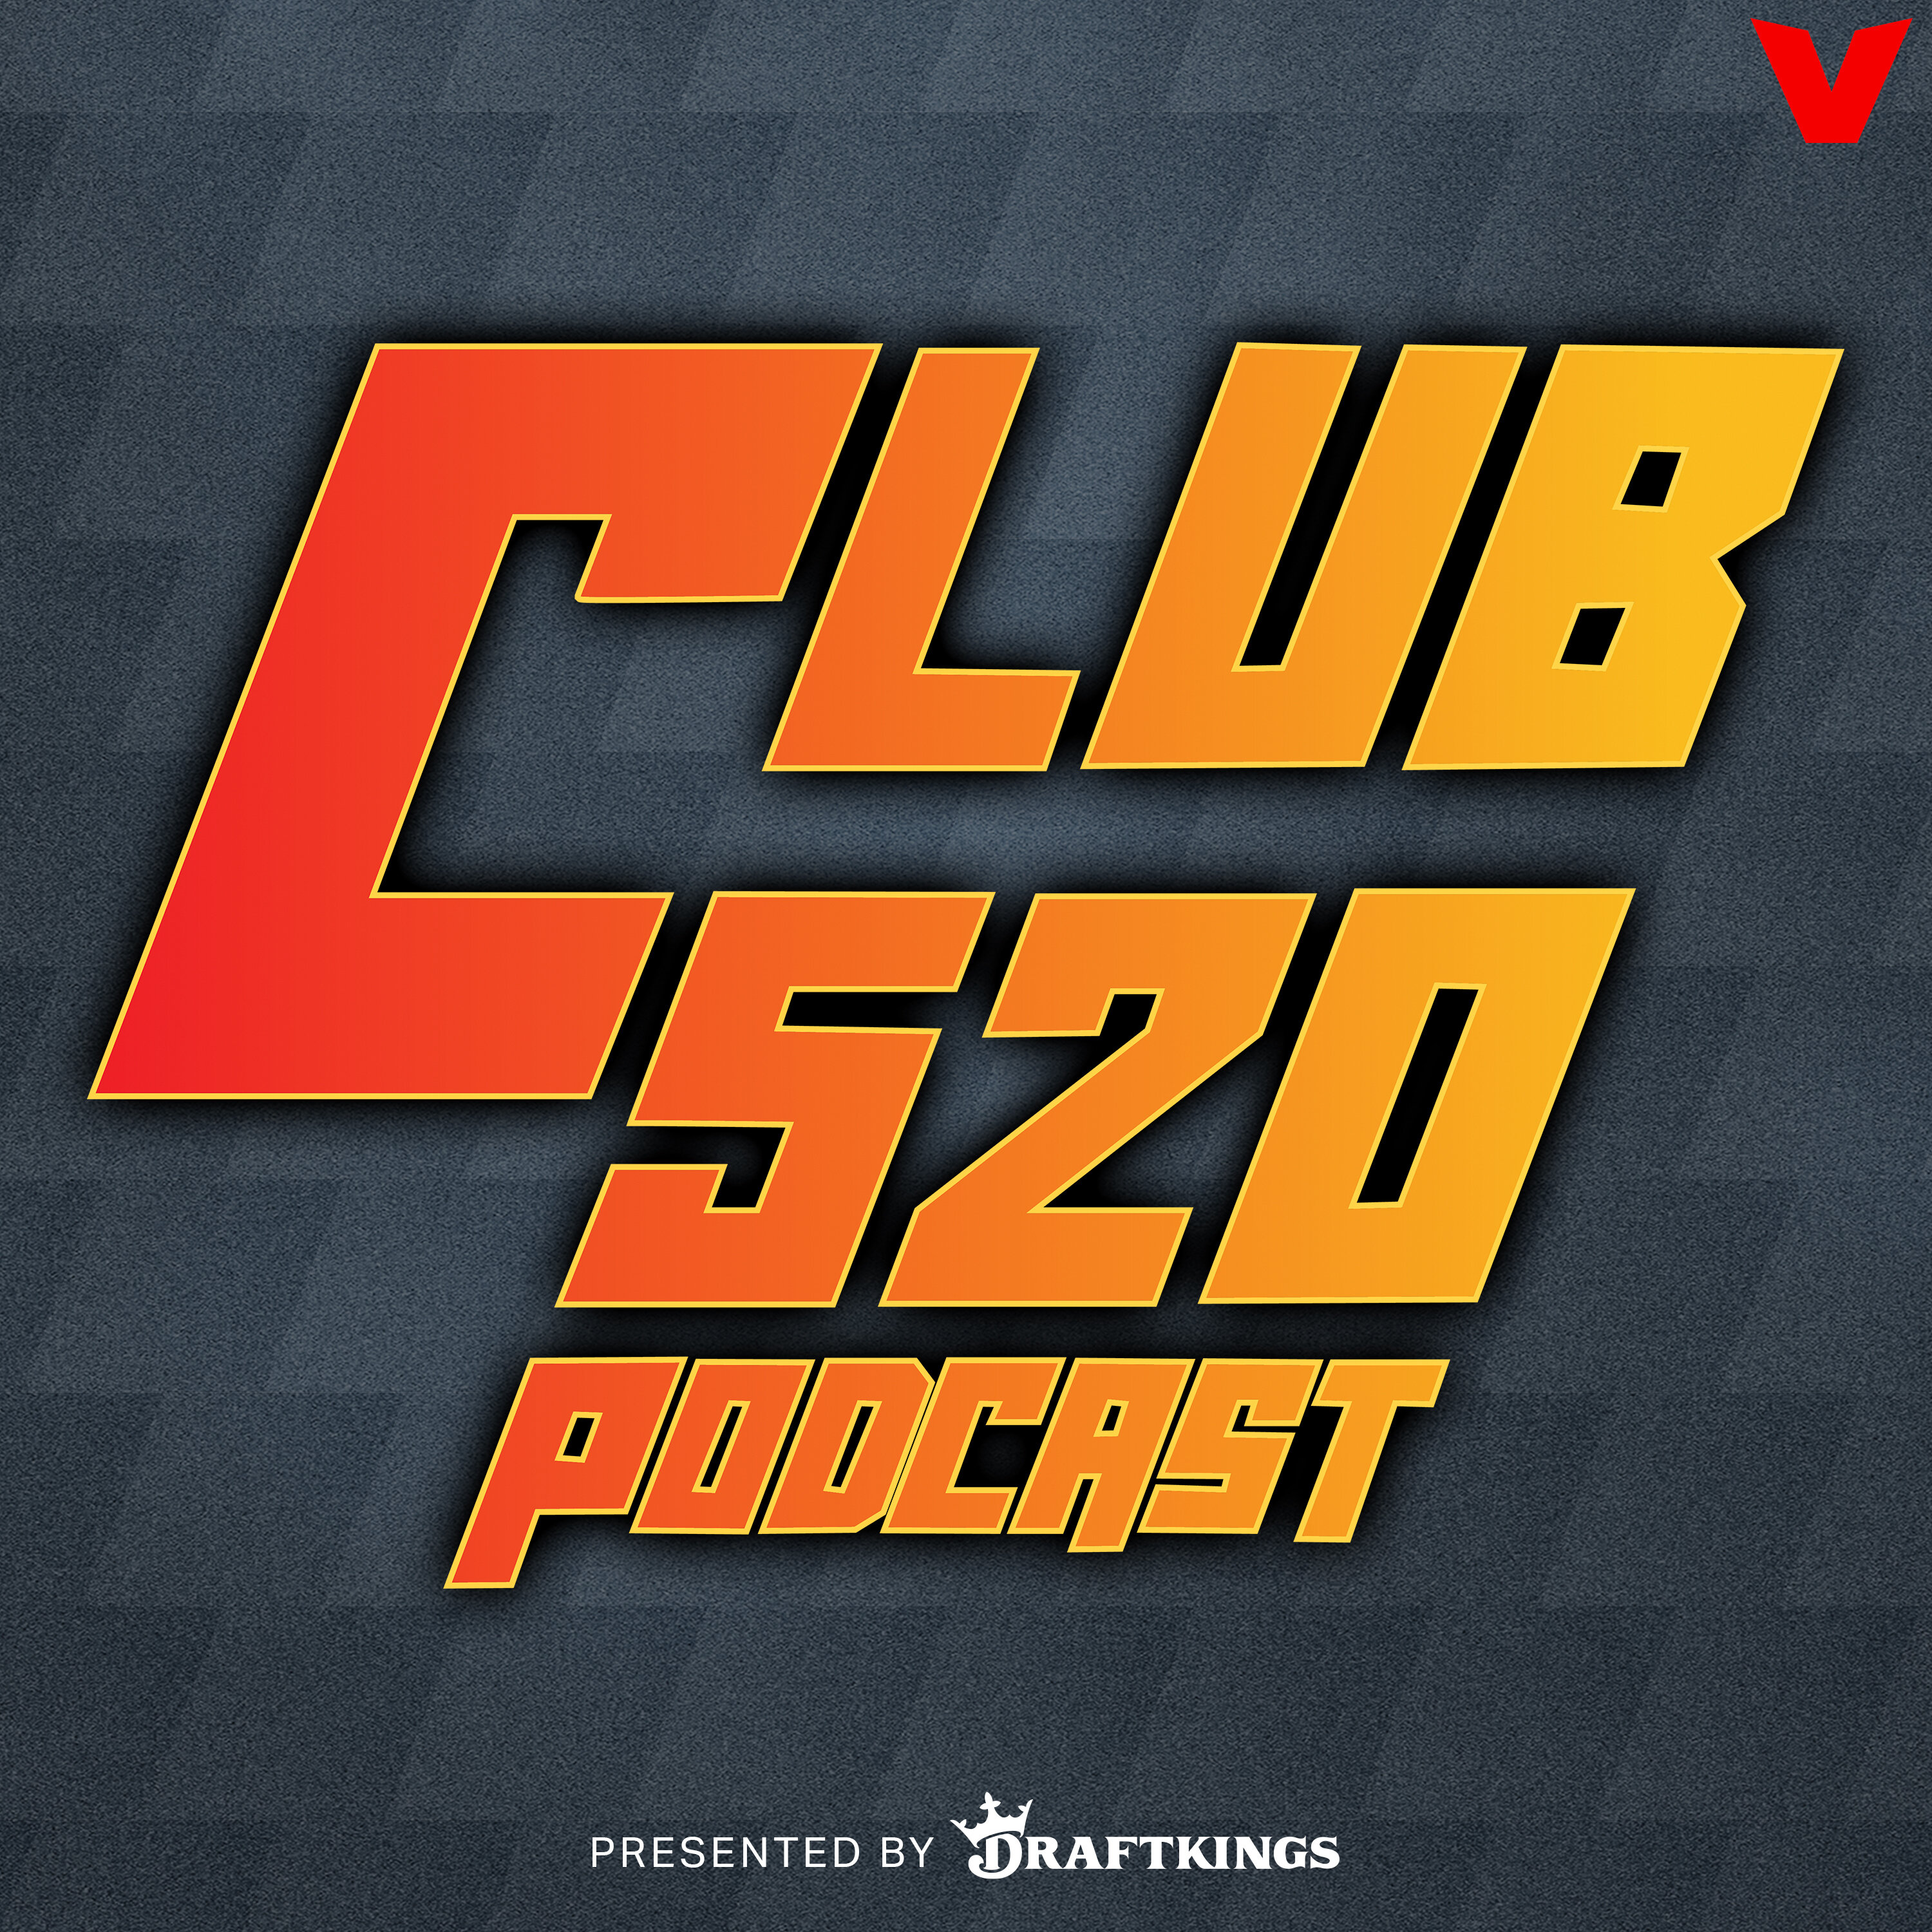 Club 520 - Jeff Teague marvels at LeBron James beating expectations, John Calipari LEAVES Kentucky by iHeartPodcasts and The Volume